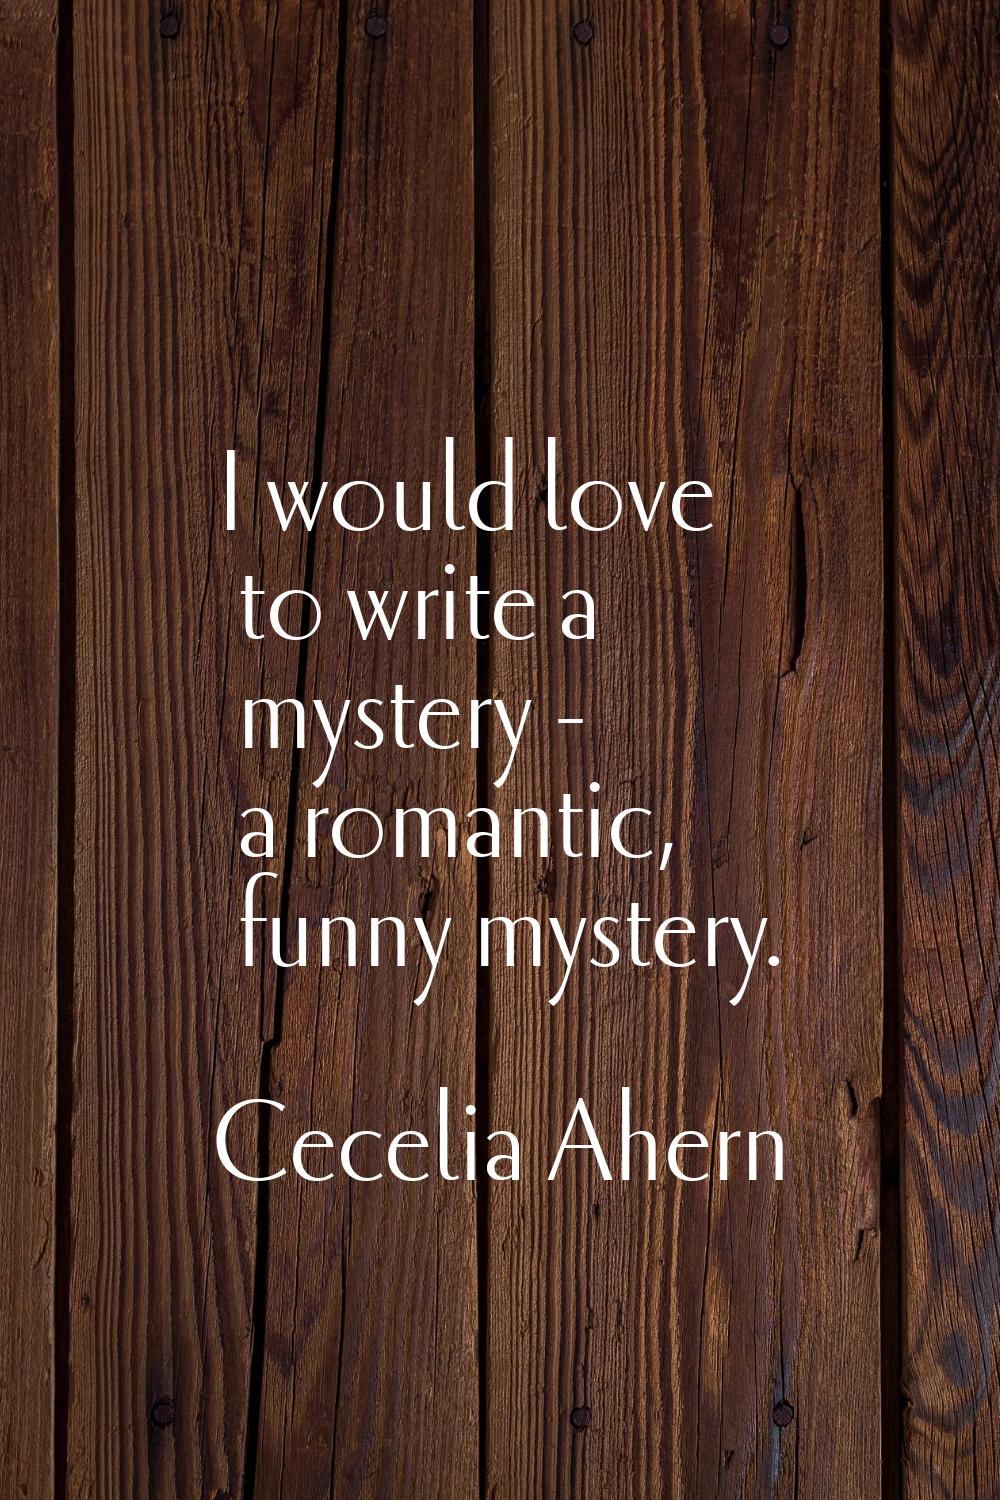 I would love to write a mystery - a romantic, funny mystery.